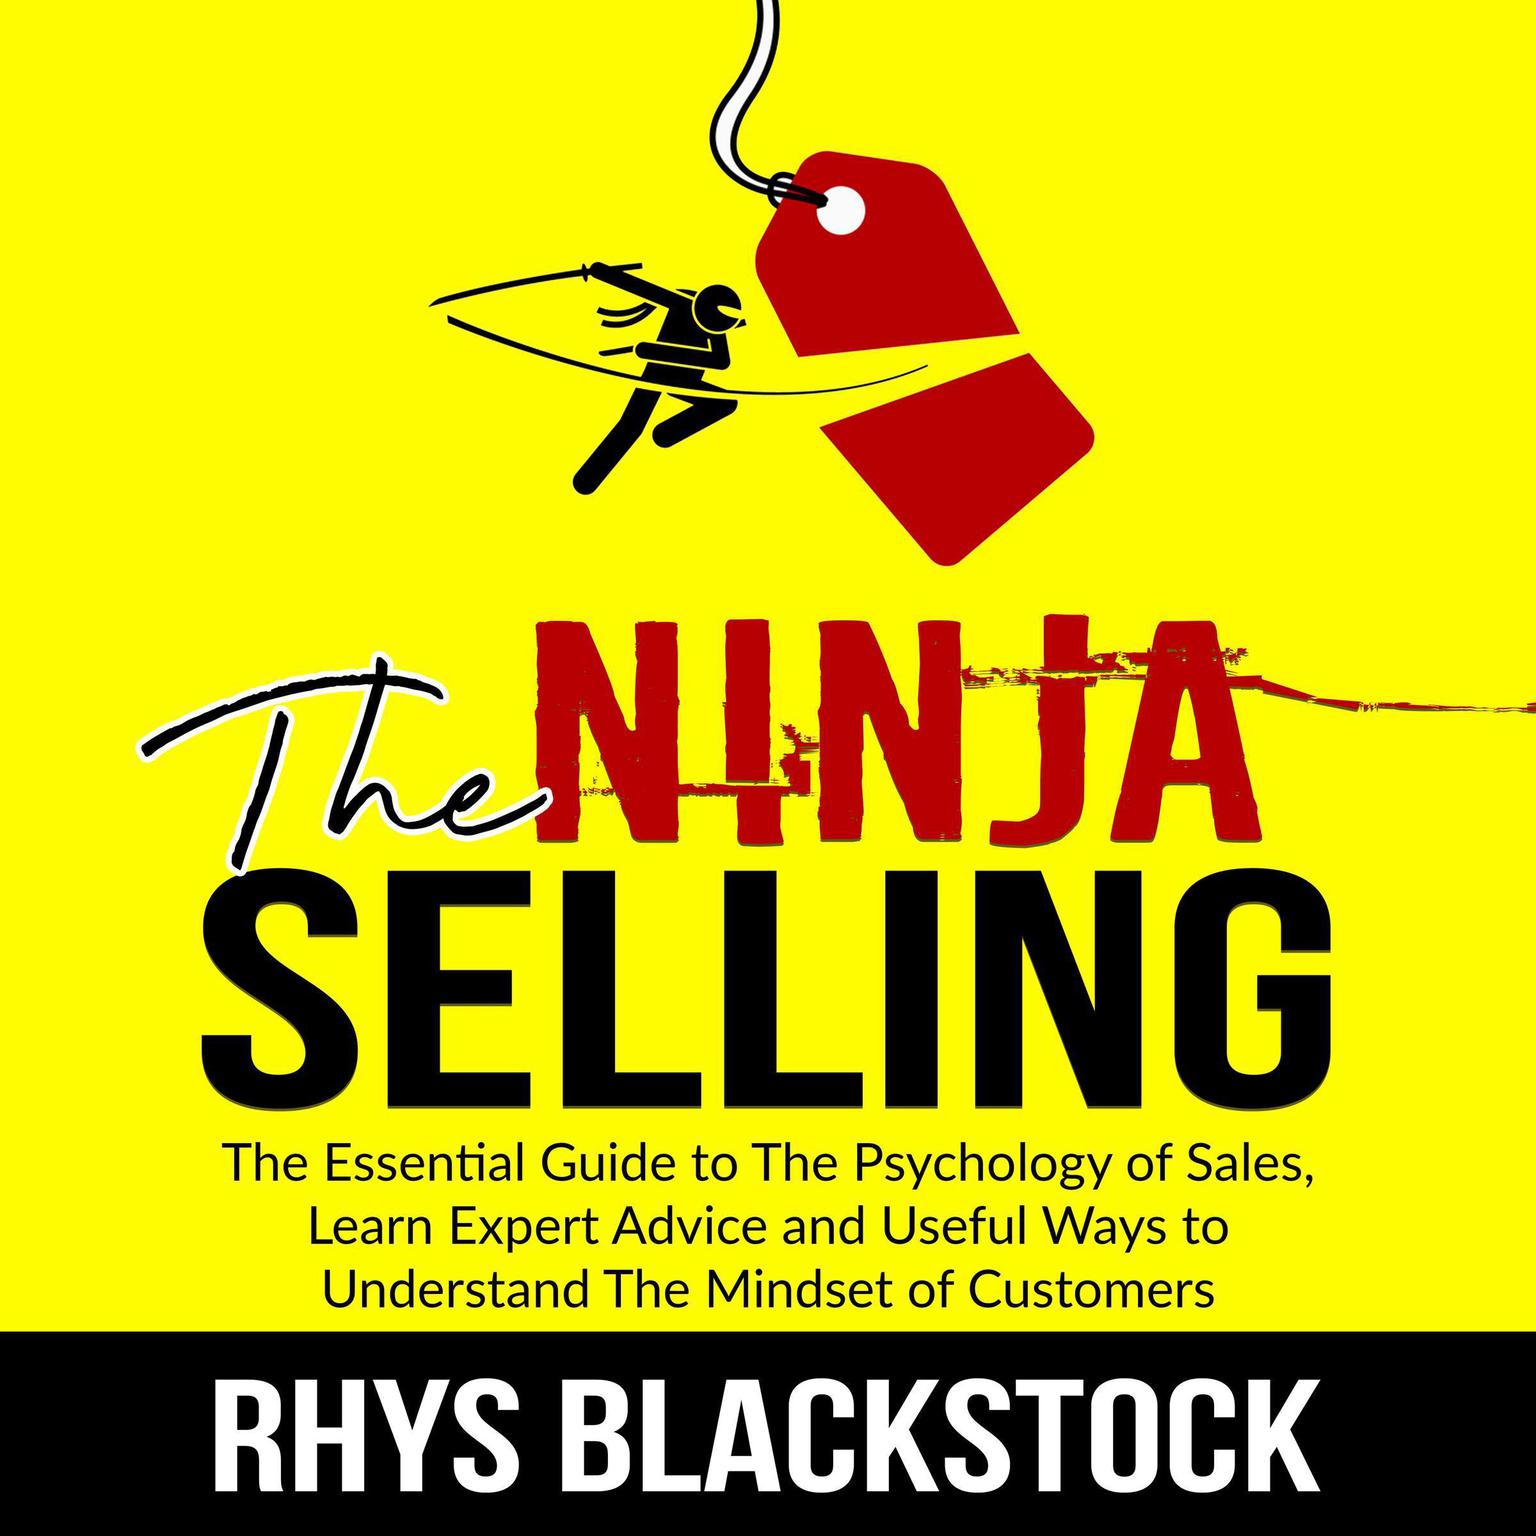 Ninja Selling: The Essential Guide to The Psychology of Sales, Learn Expert Advice and Useful Ways to Understand The Mindset of Customers: The Essential Guide to The Psychology of Sales, Learn Expert Advice and Useful Ways to Understand The Mindset of Customers  Audiobook, by Rhys Blackstock